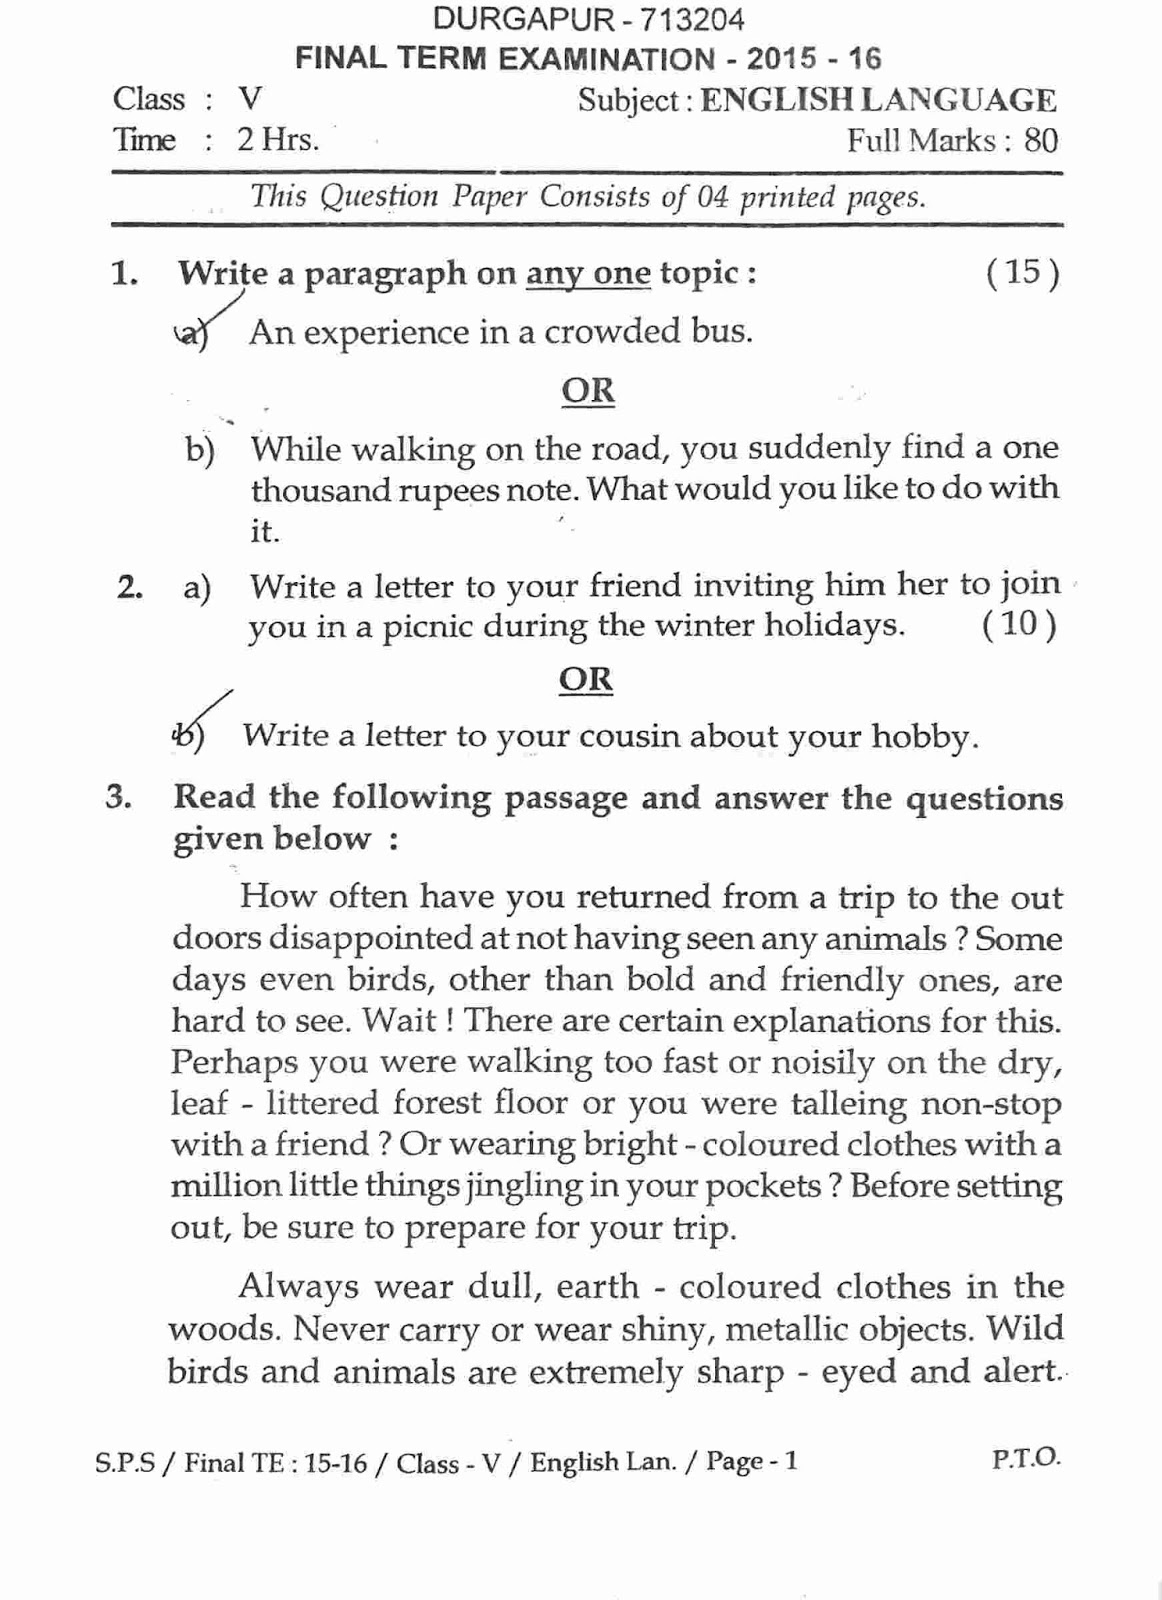 Question Paper English Language Class 5 of a School Final year